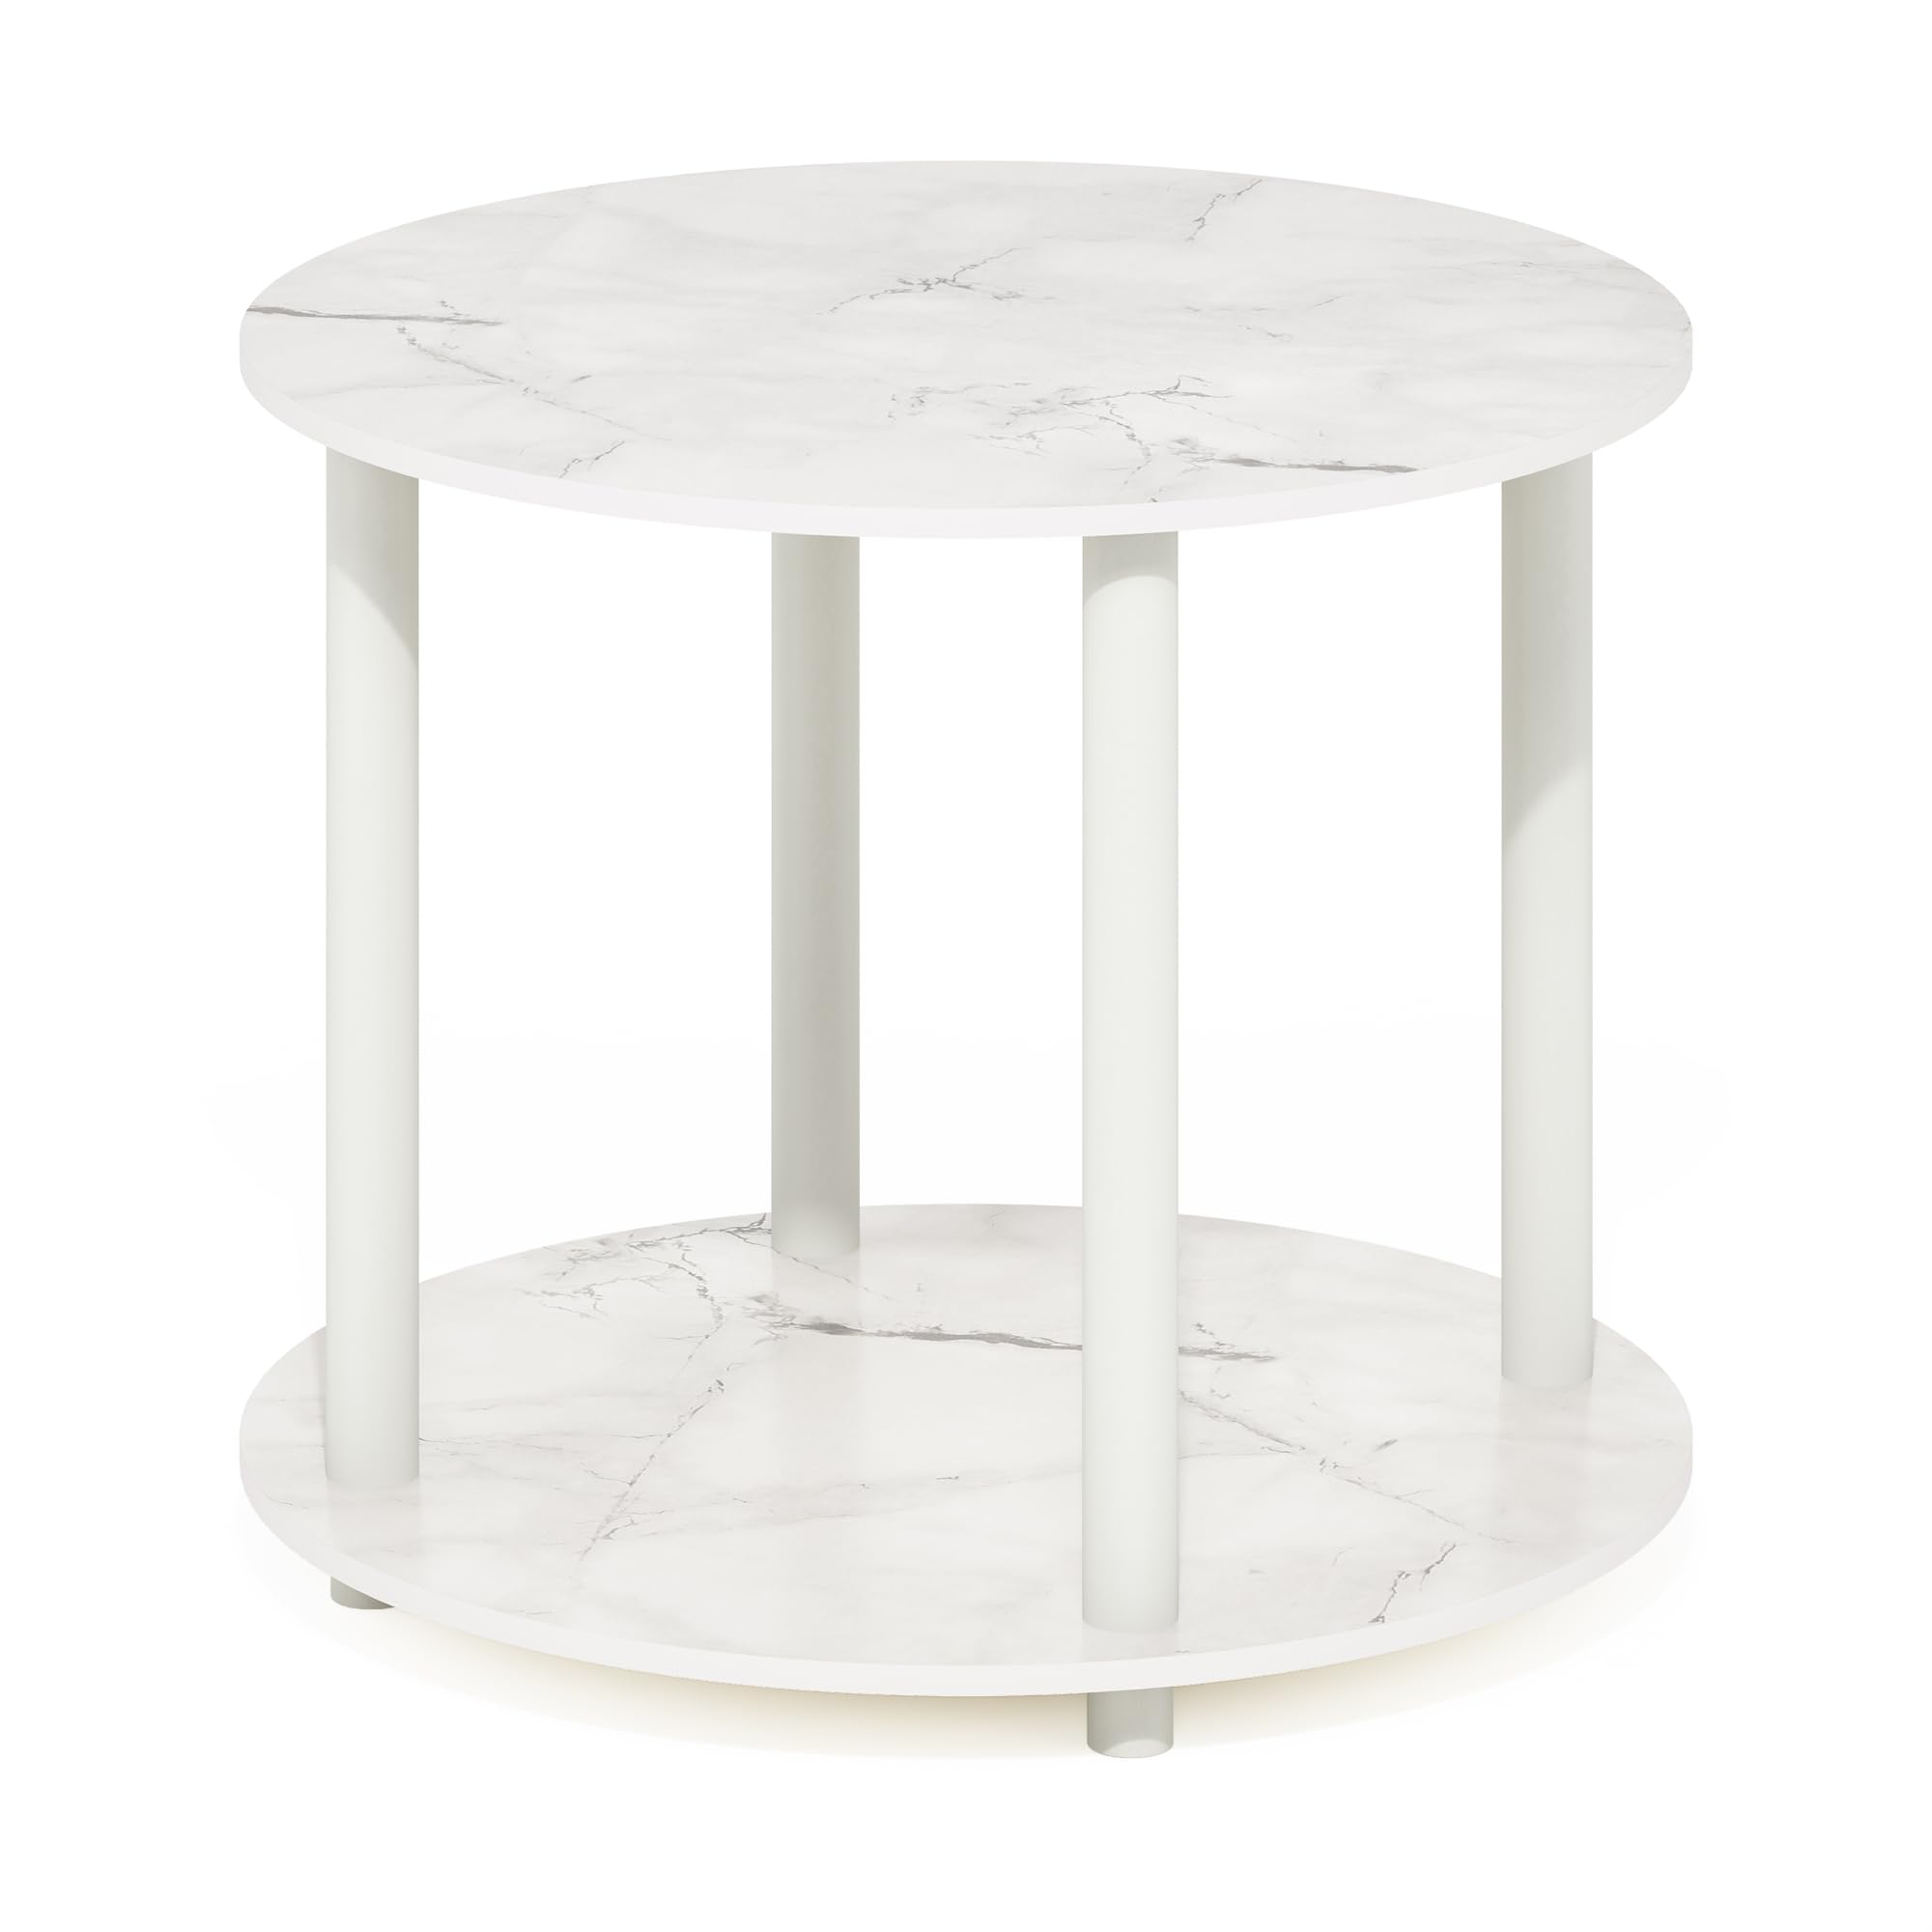 Furinno Turn-N-Tube Simple Design 2-Tier Round Wooden Small Coffee Table, Marble White